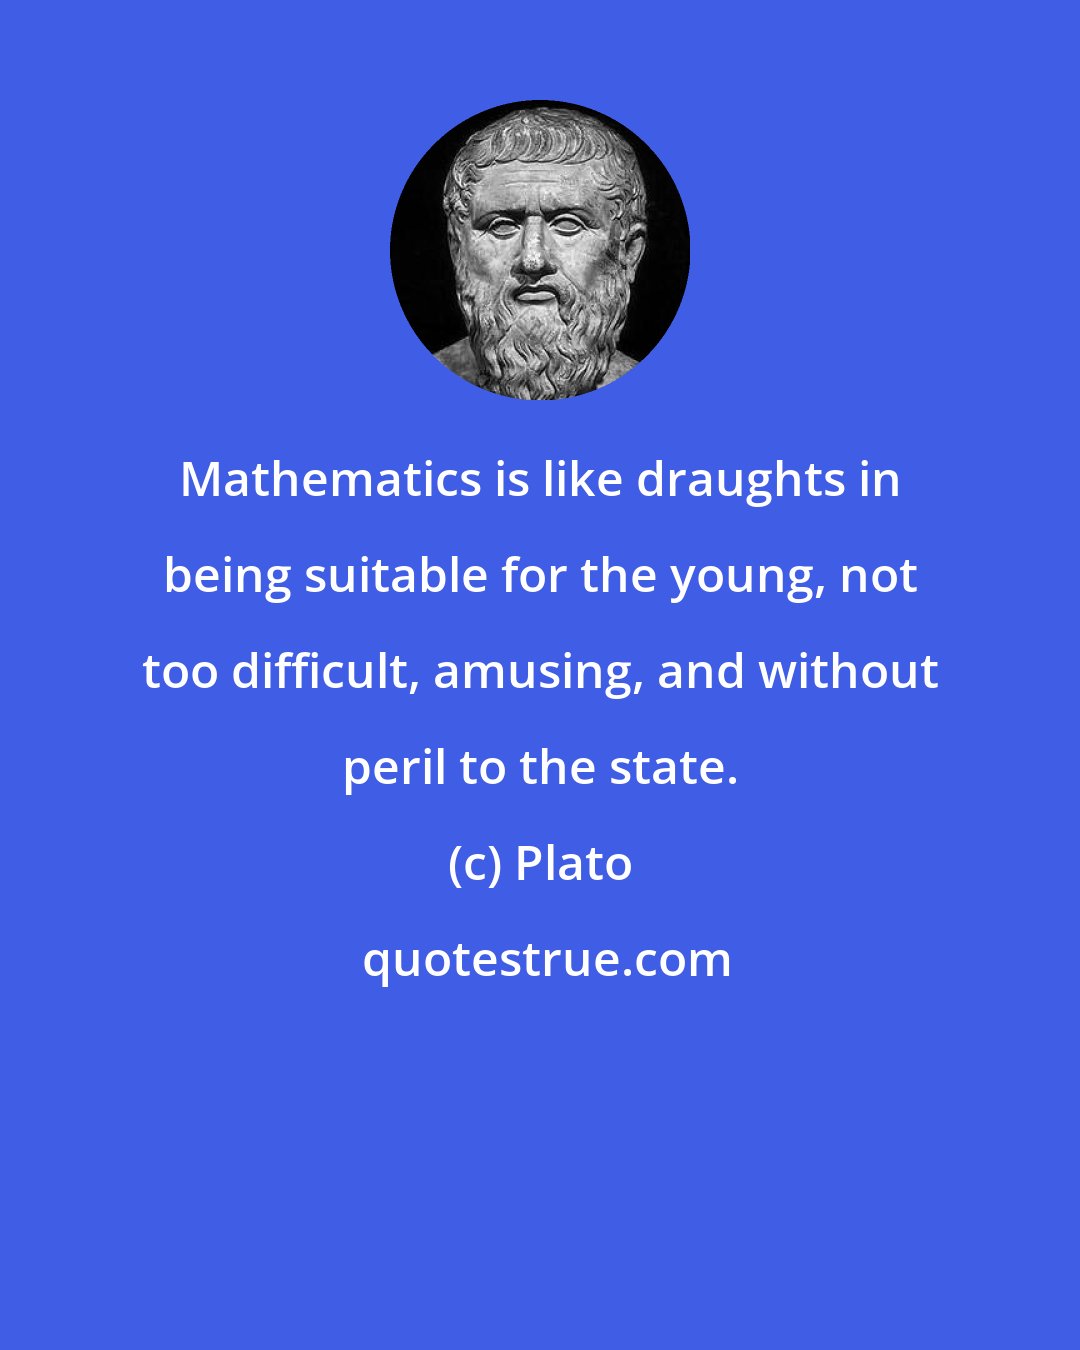 Plato: Mathematics is like draughts in being suitable for the young, not too difficult, amusing, and without peril to the state.